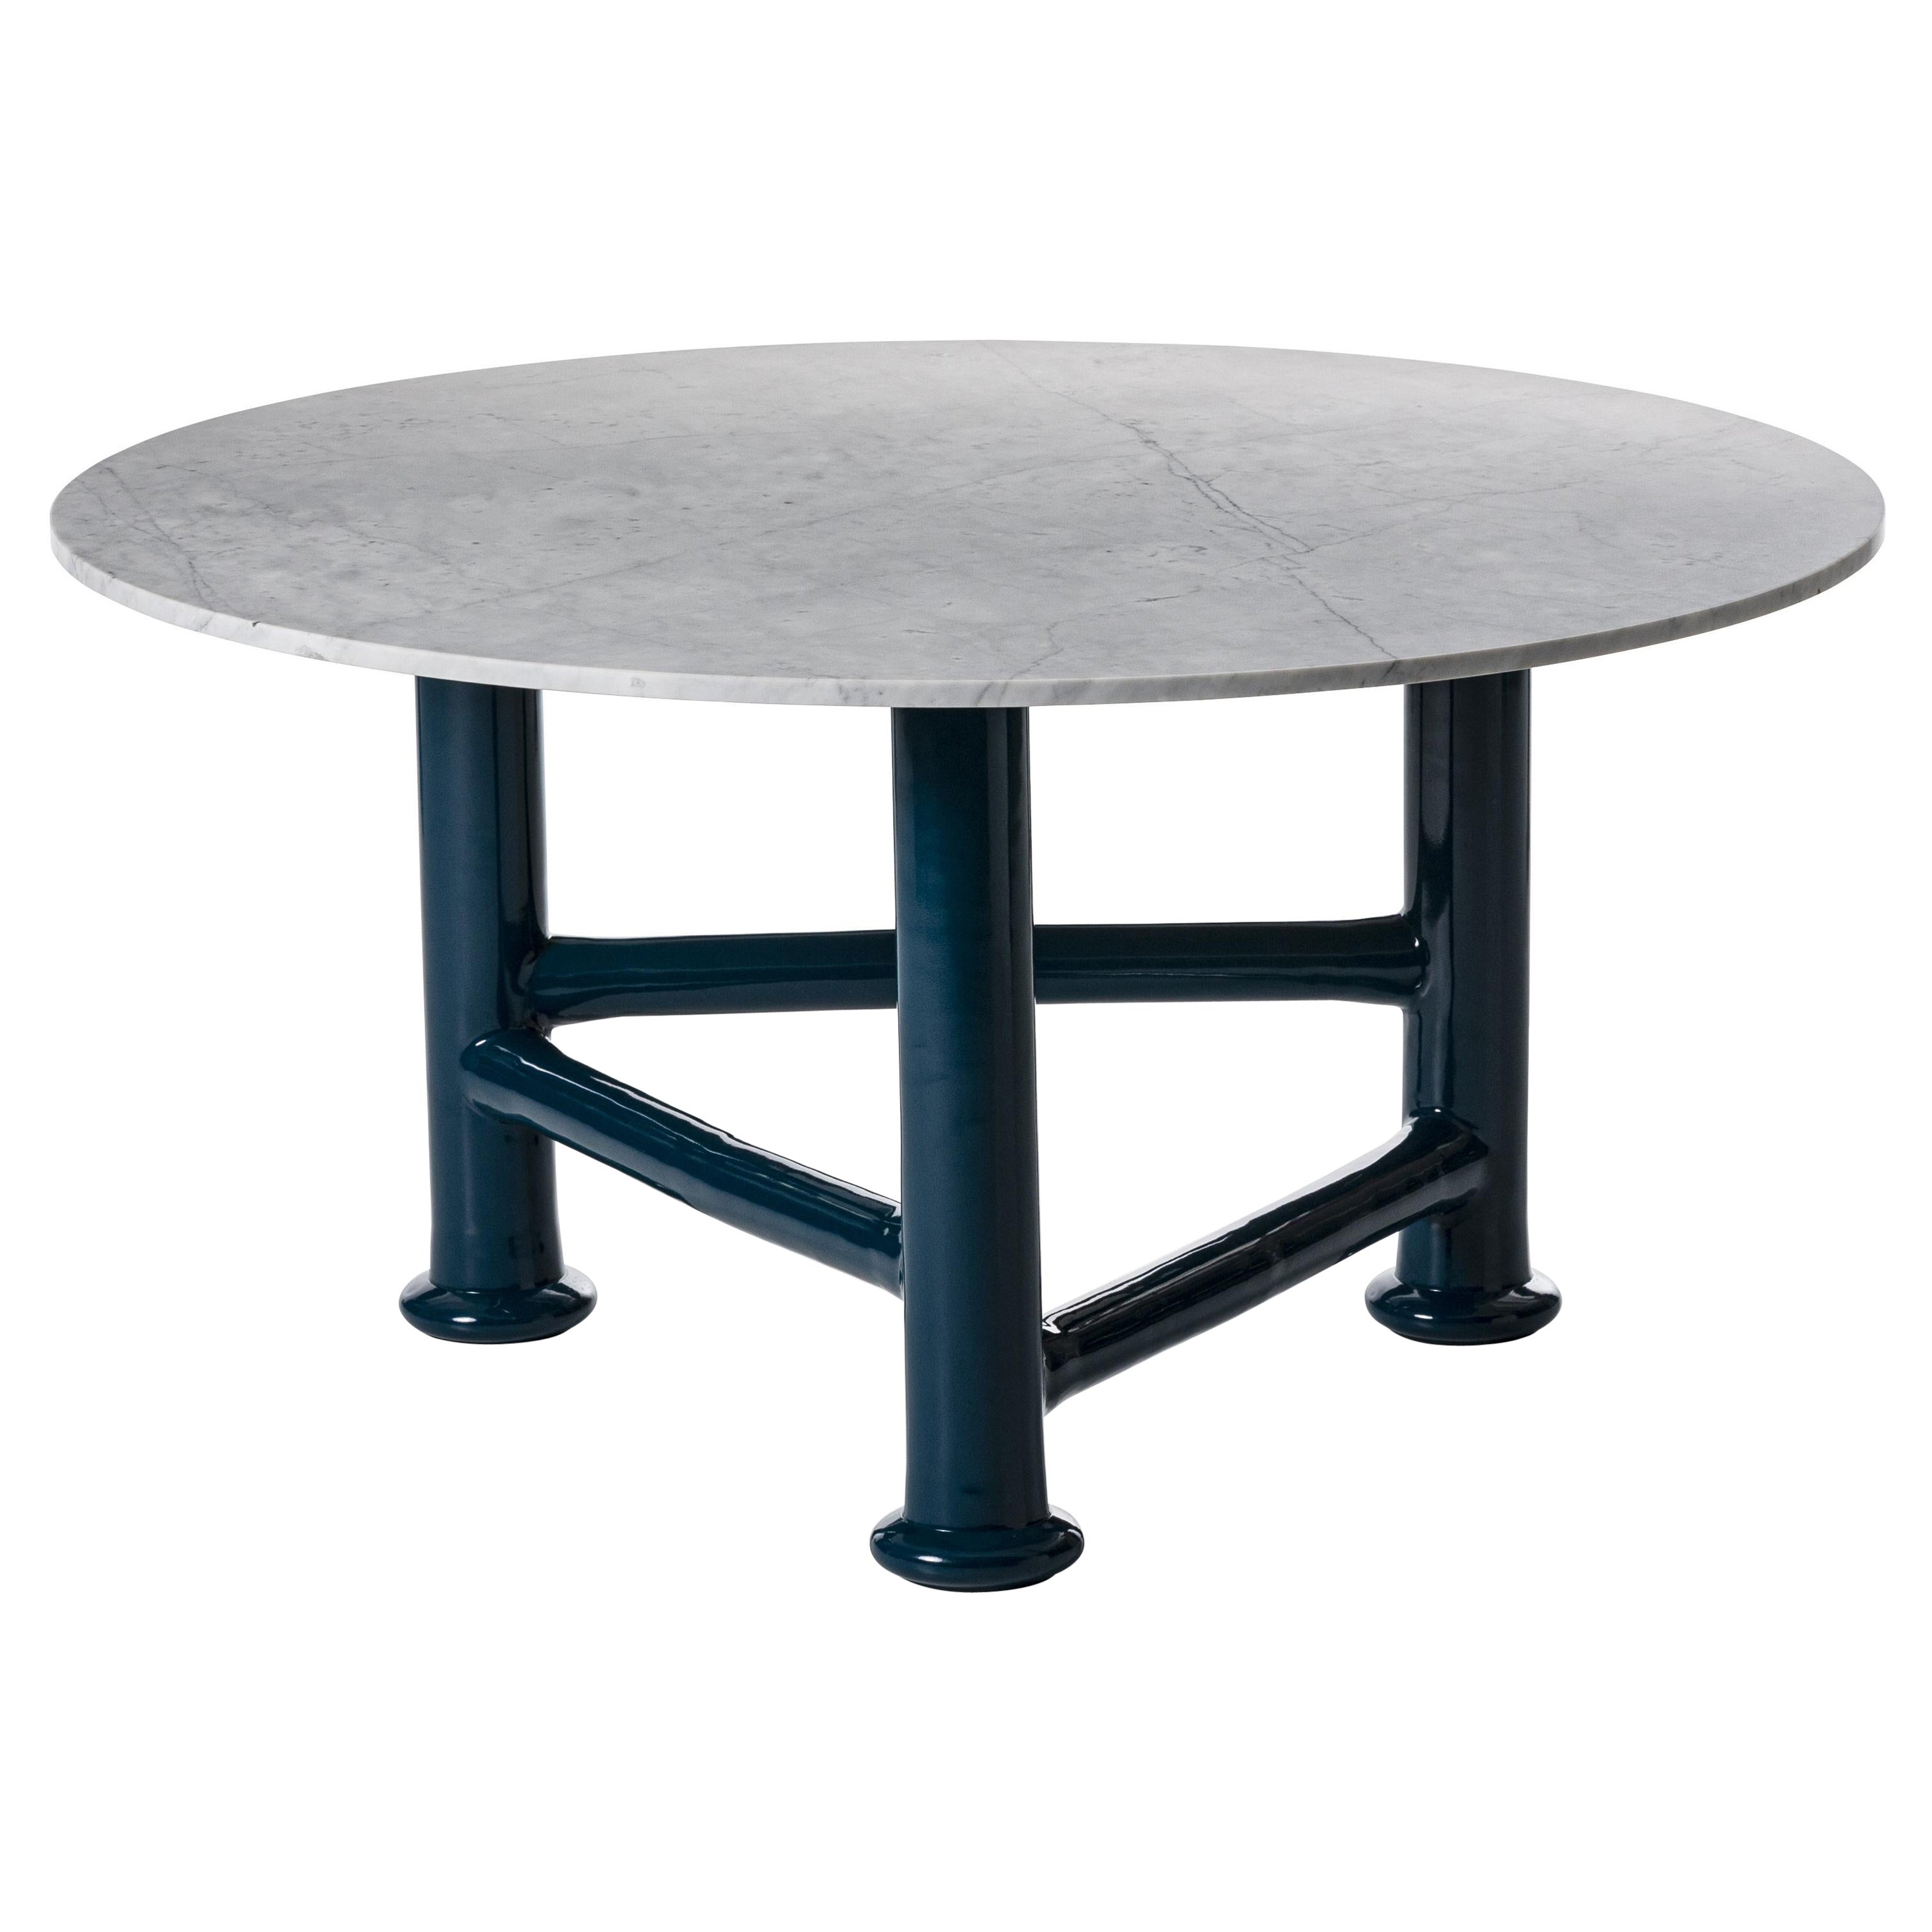 Gervasoni Next 32 Ocean Lacquered Table with Carrara Marble Top by Paola Navone For Sale